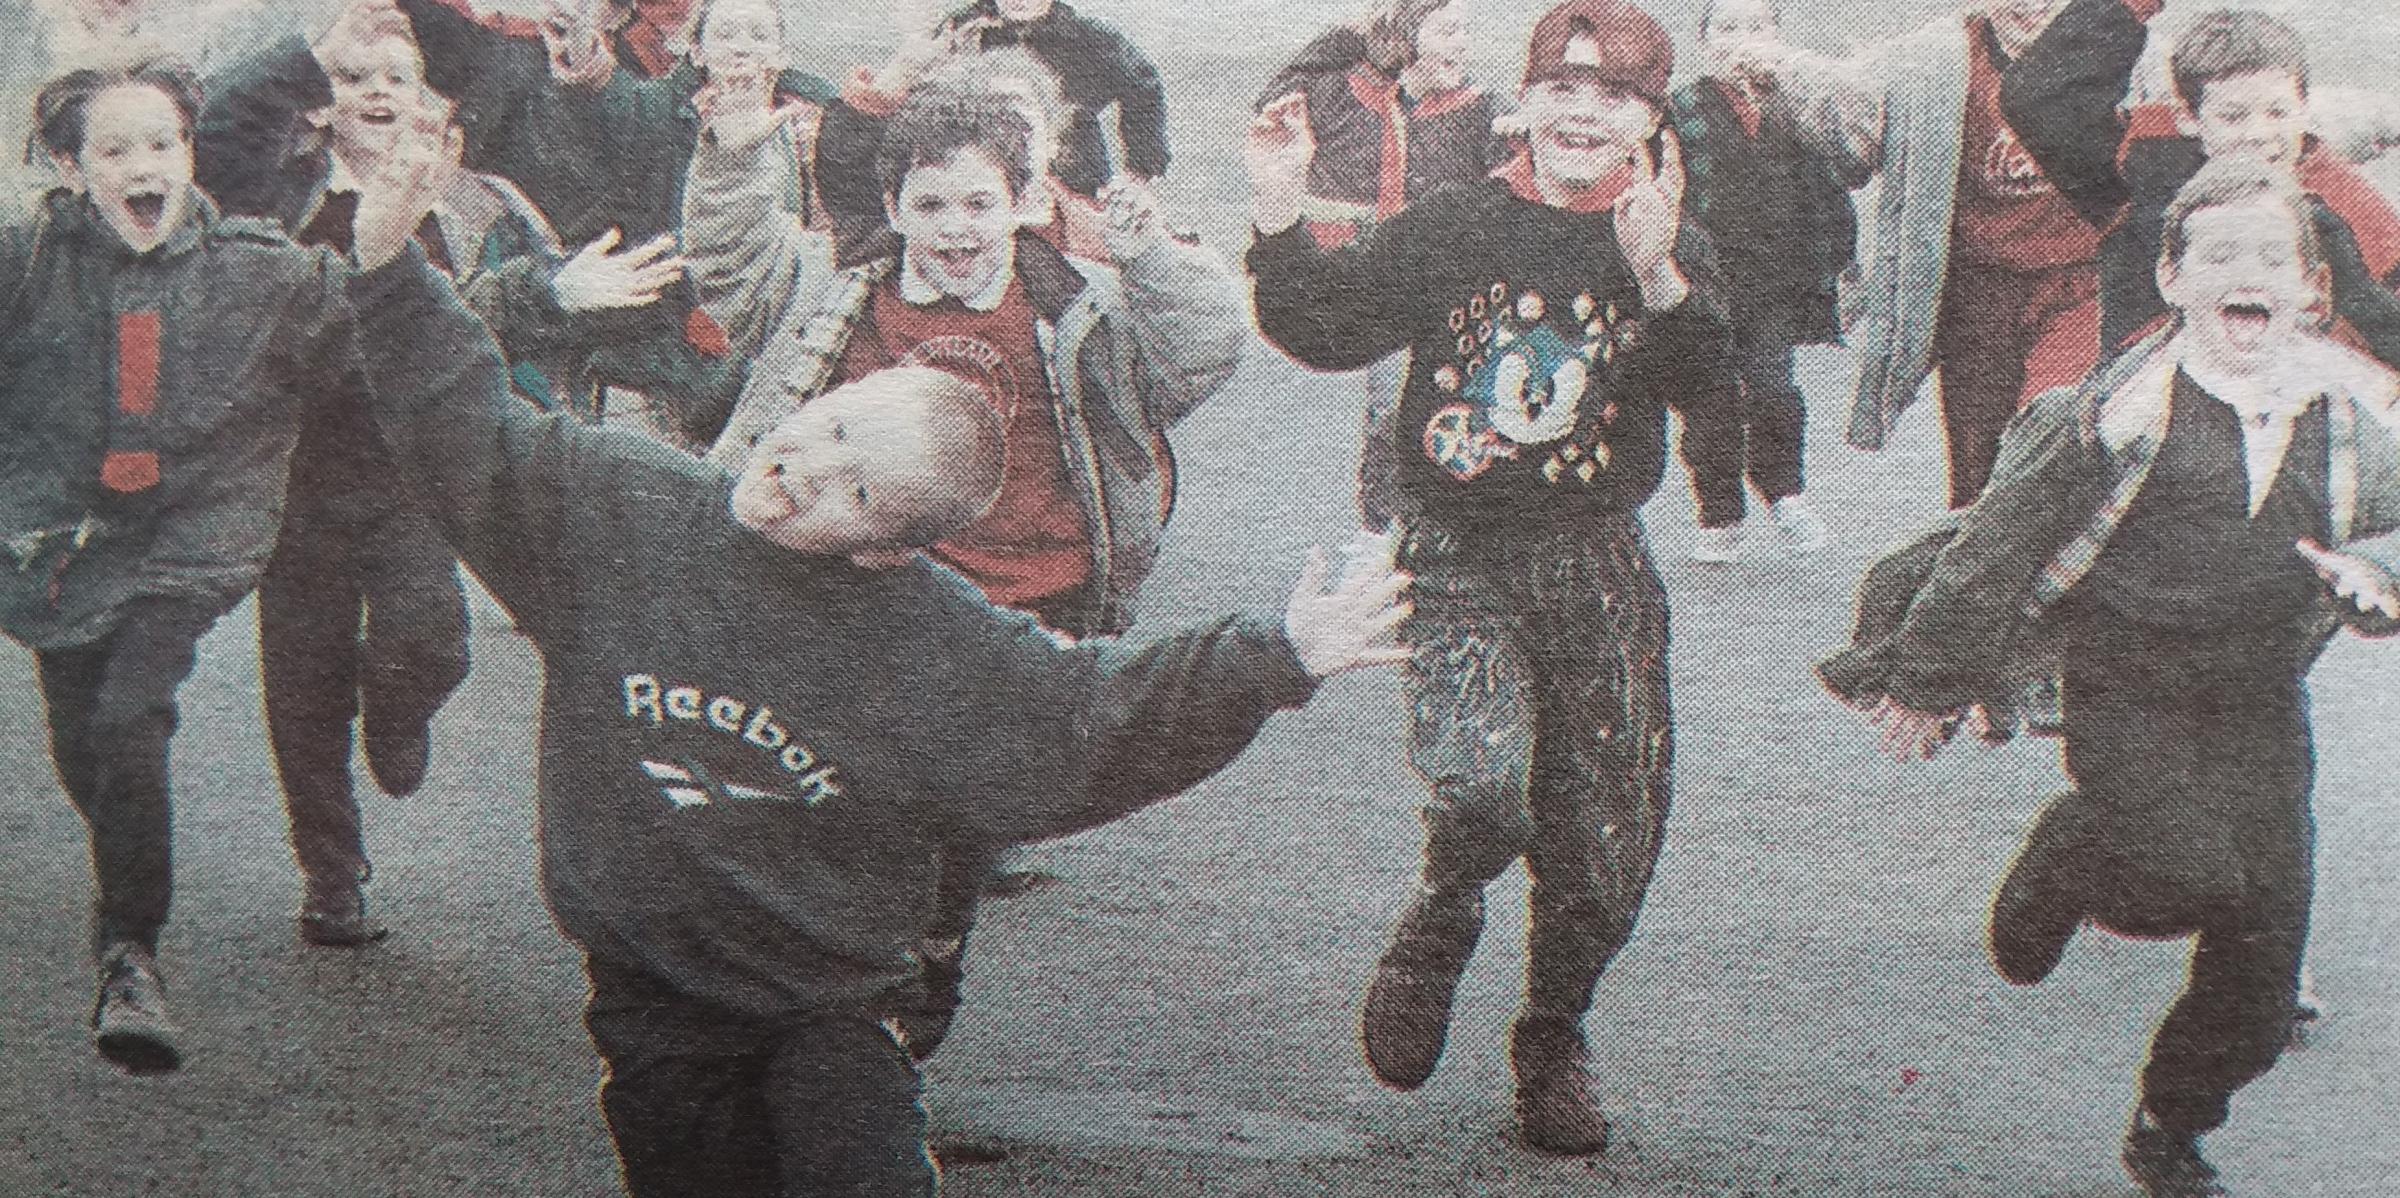 The mile run for charity at the racecourse in March 1996 was no bother for these happy youngsters